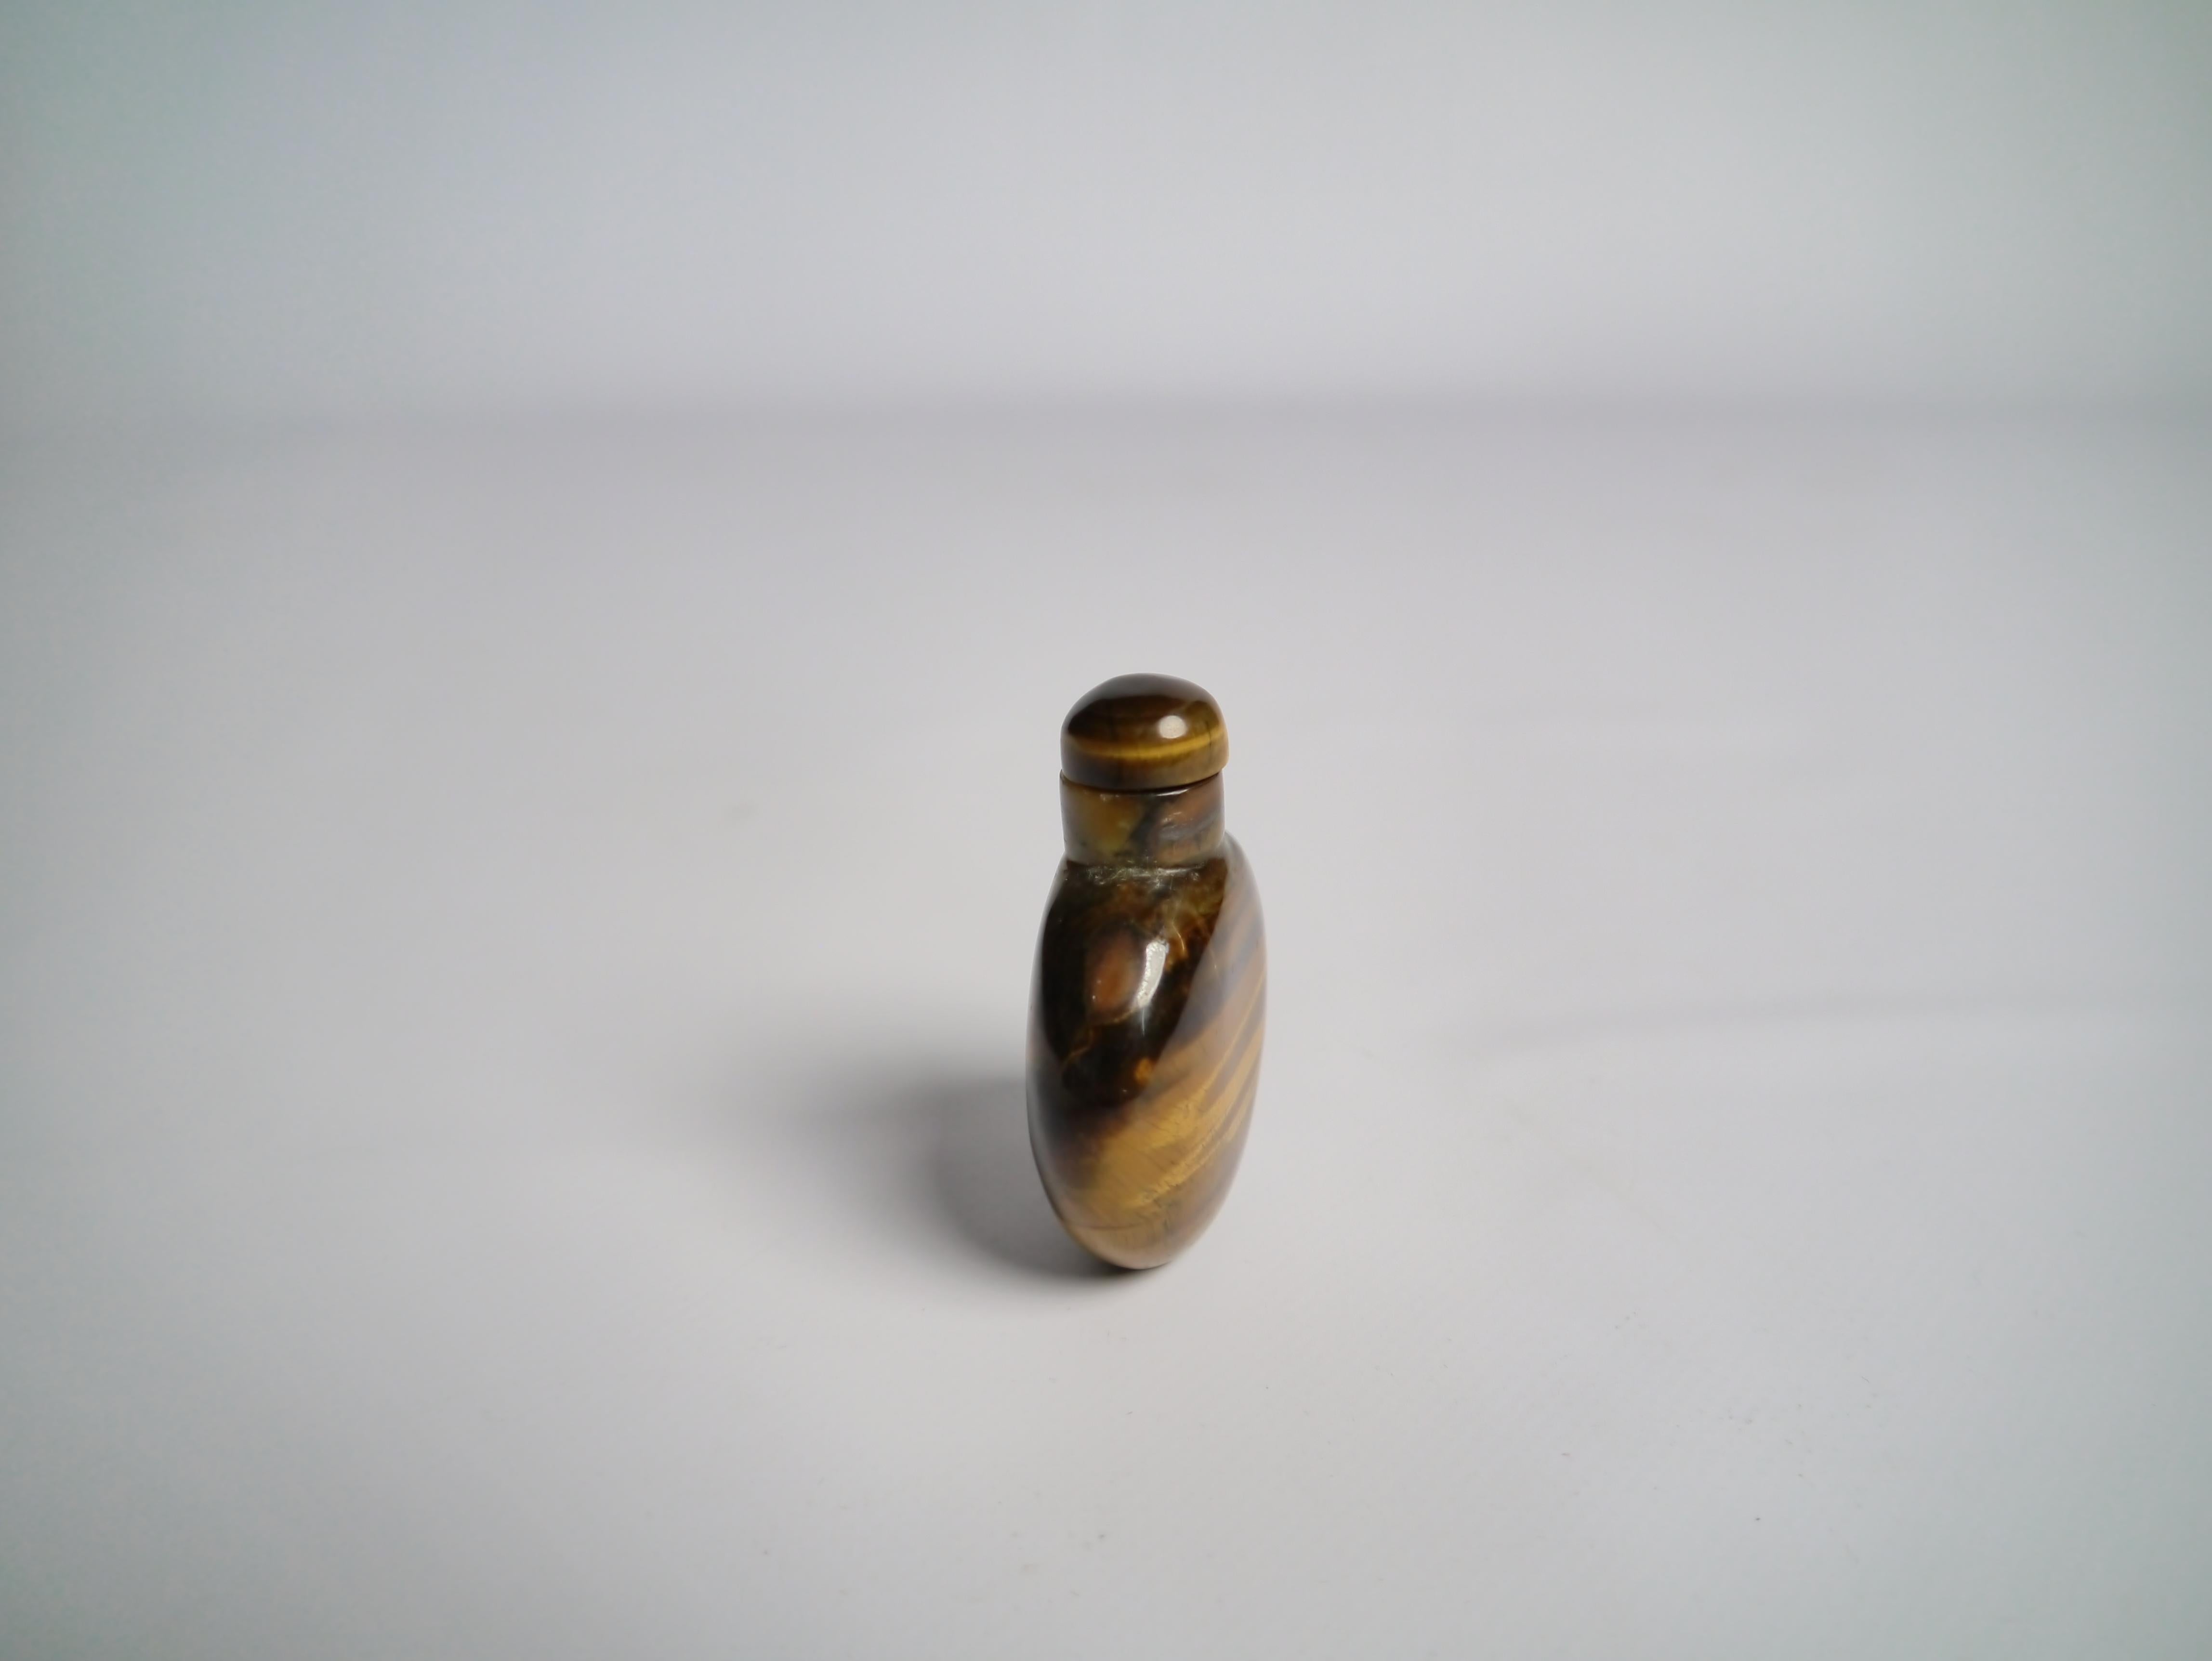 Early 20th century Chinese snuff bottle. Bottle and tap made out of tiger eye stone.